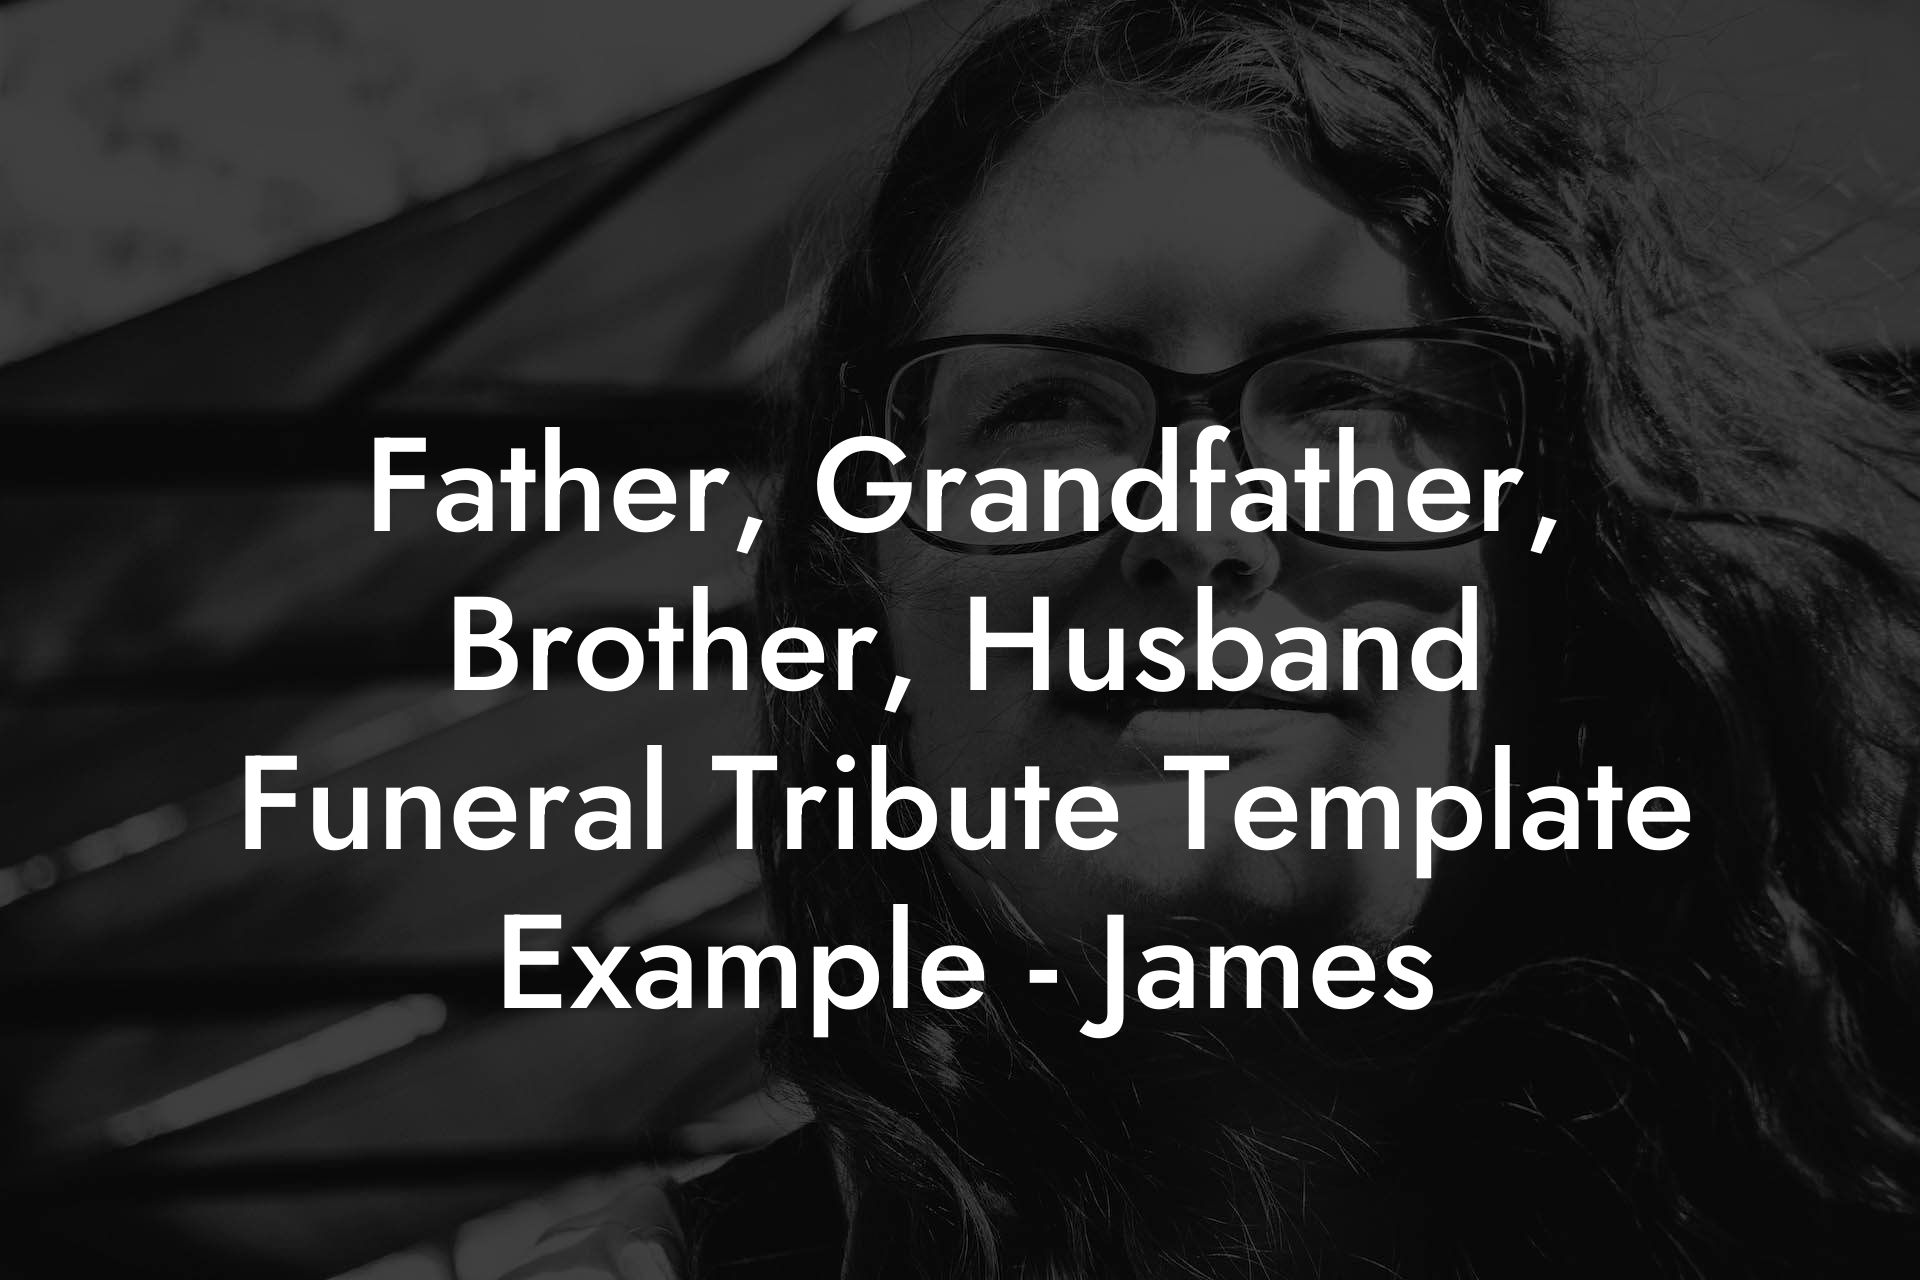 Father, Grandfather, Brother, Husband  Funeral Tribute Template Example - James